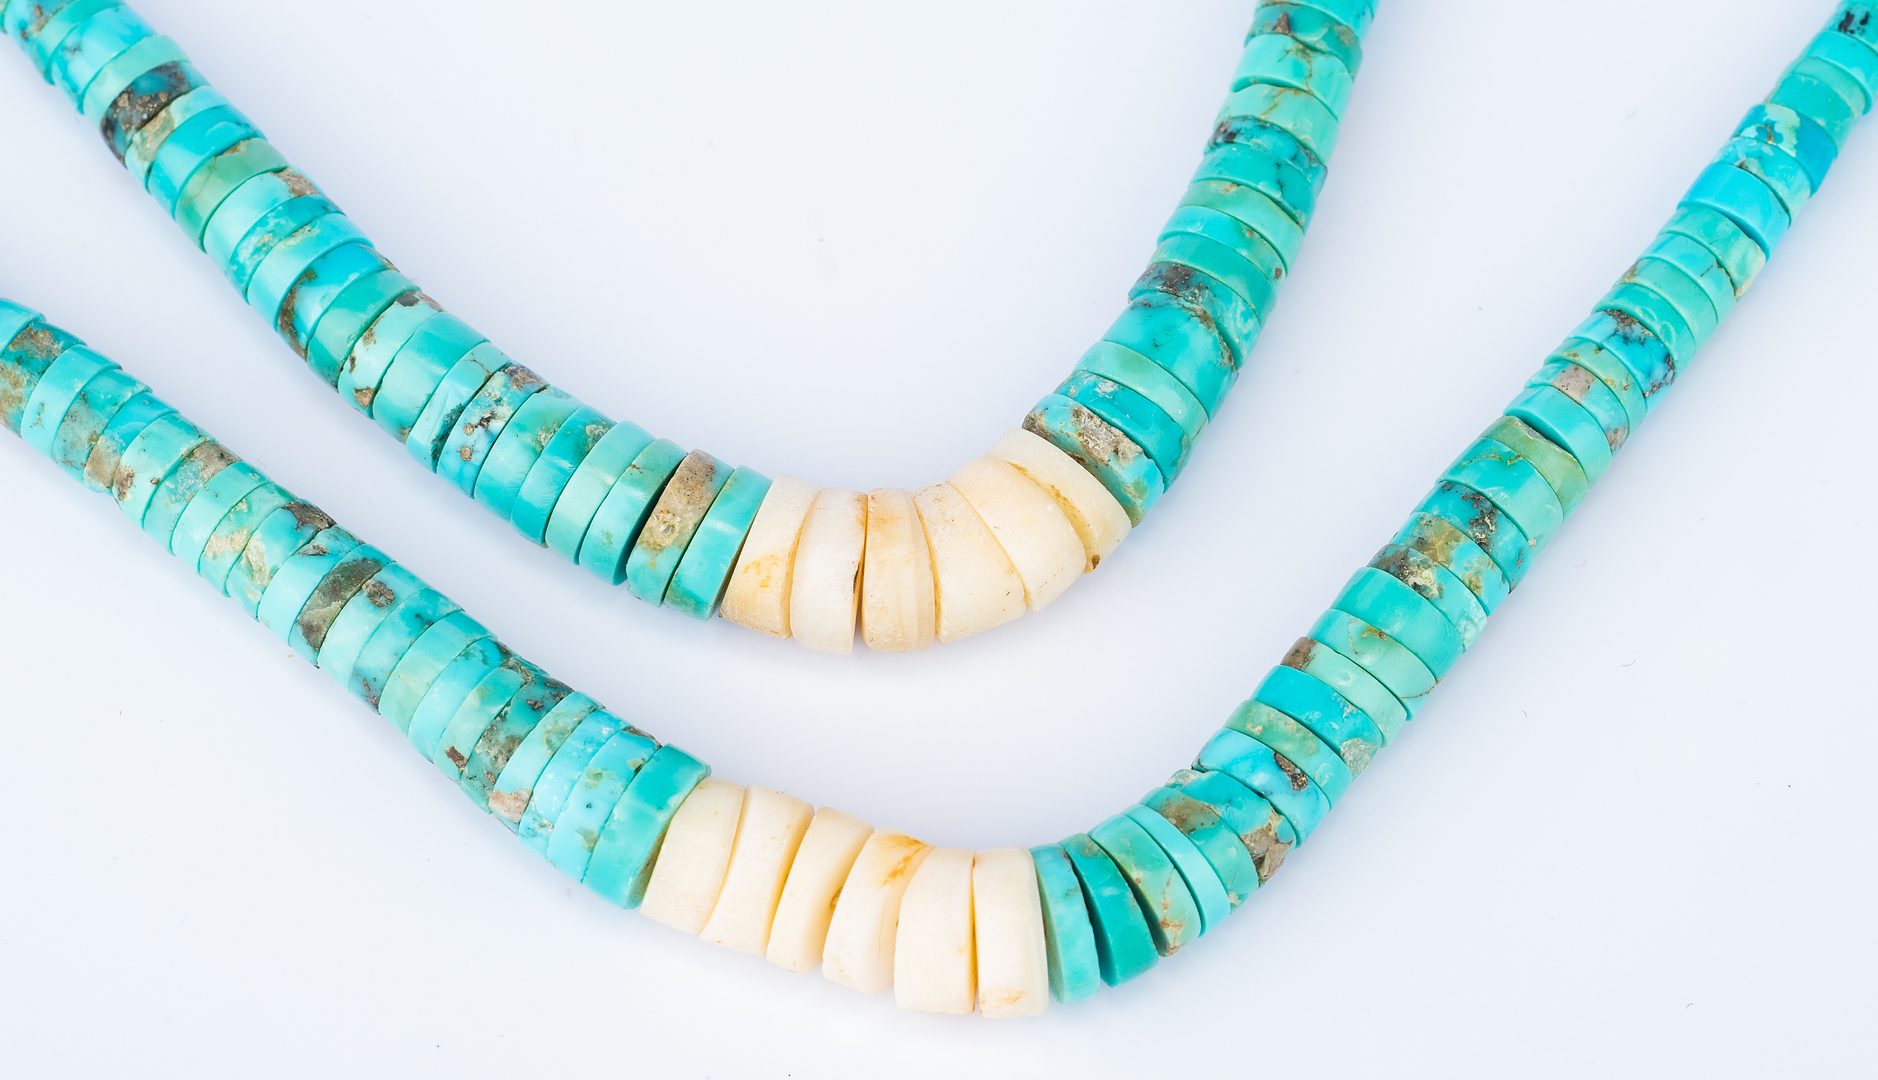 Lot 298: 2 Native American Turquoise Necklaces